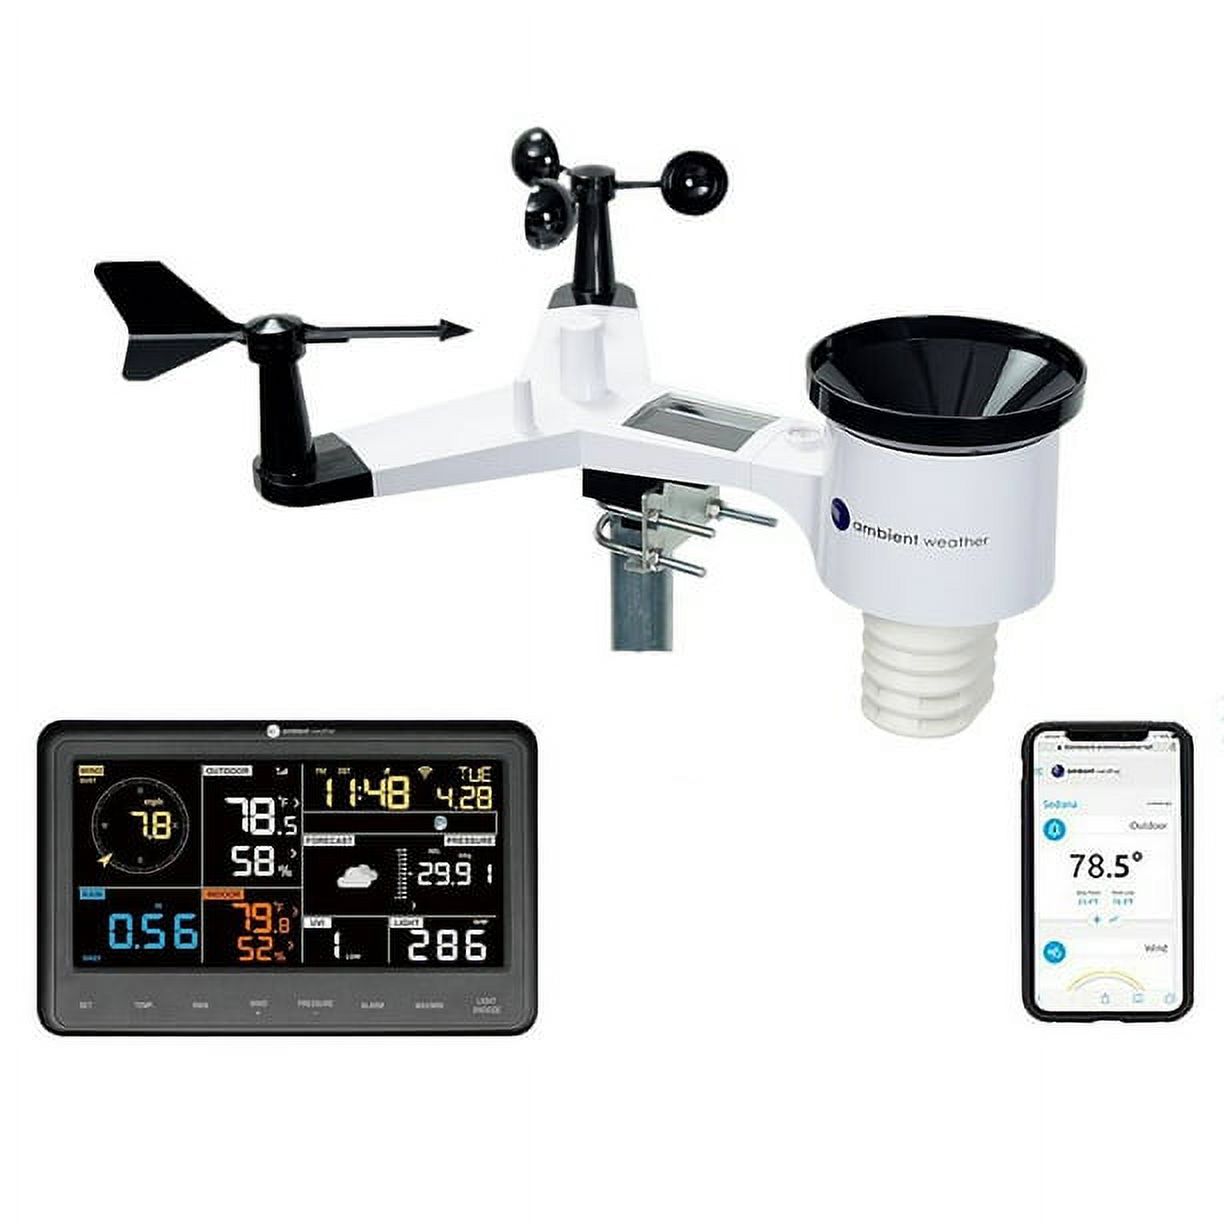 Ambient Weather WS-2902 Smart Wi-Fi Weather Station with Remote Monitoring and Alerts - image 1 of 10